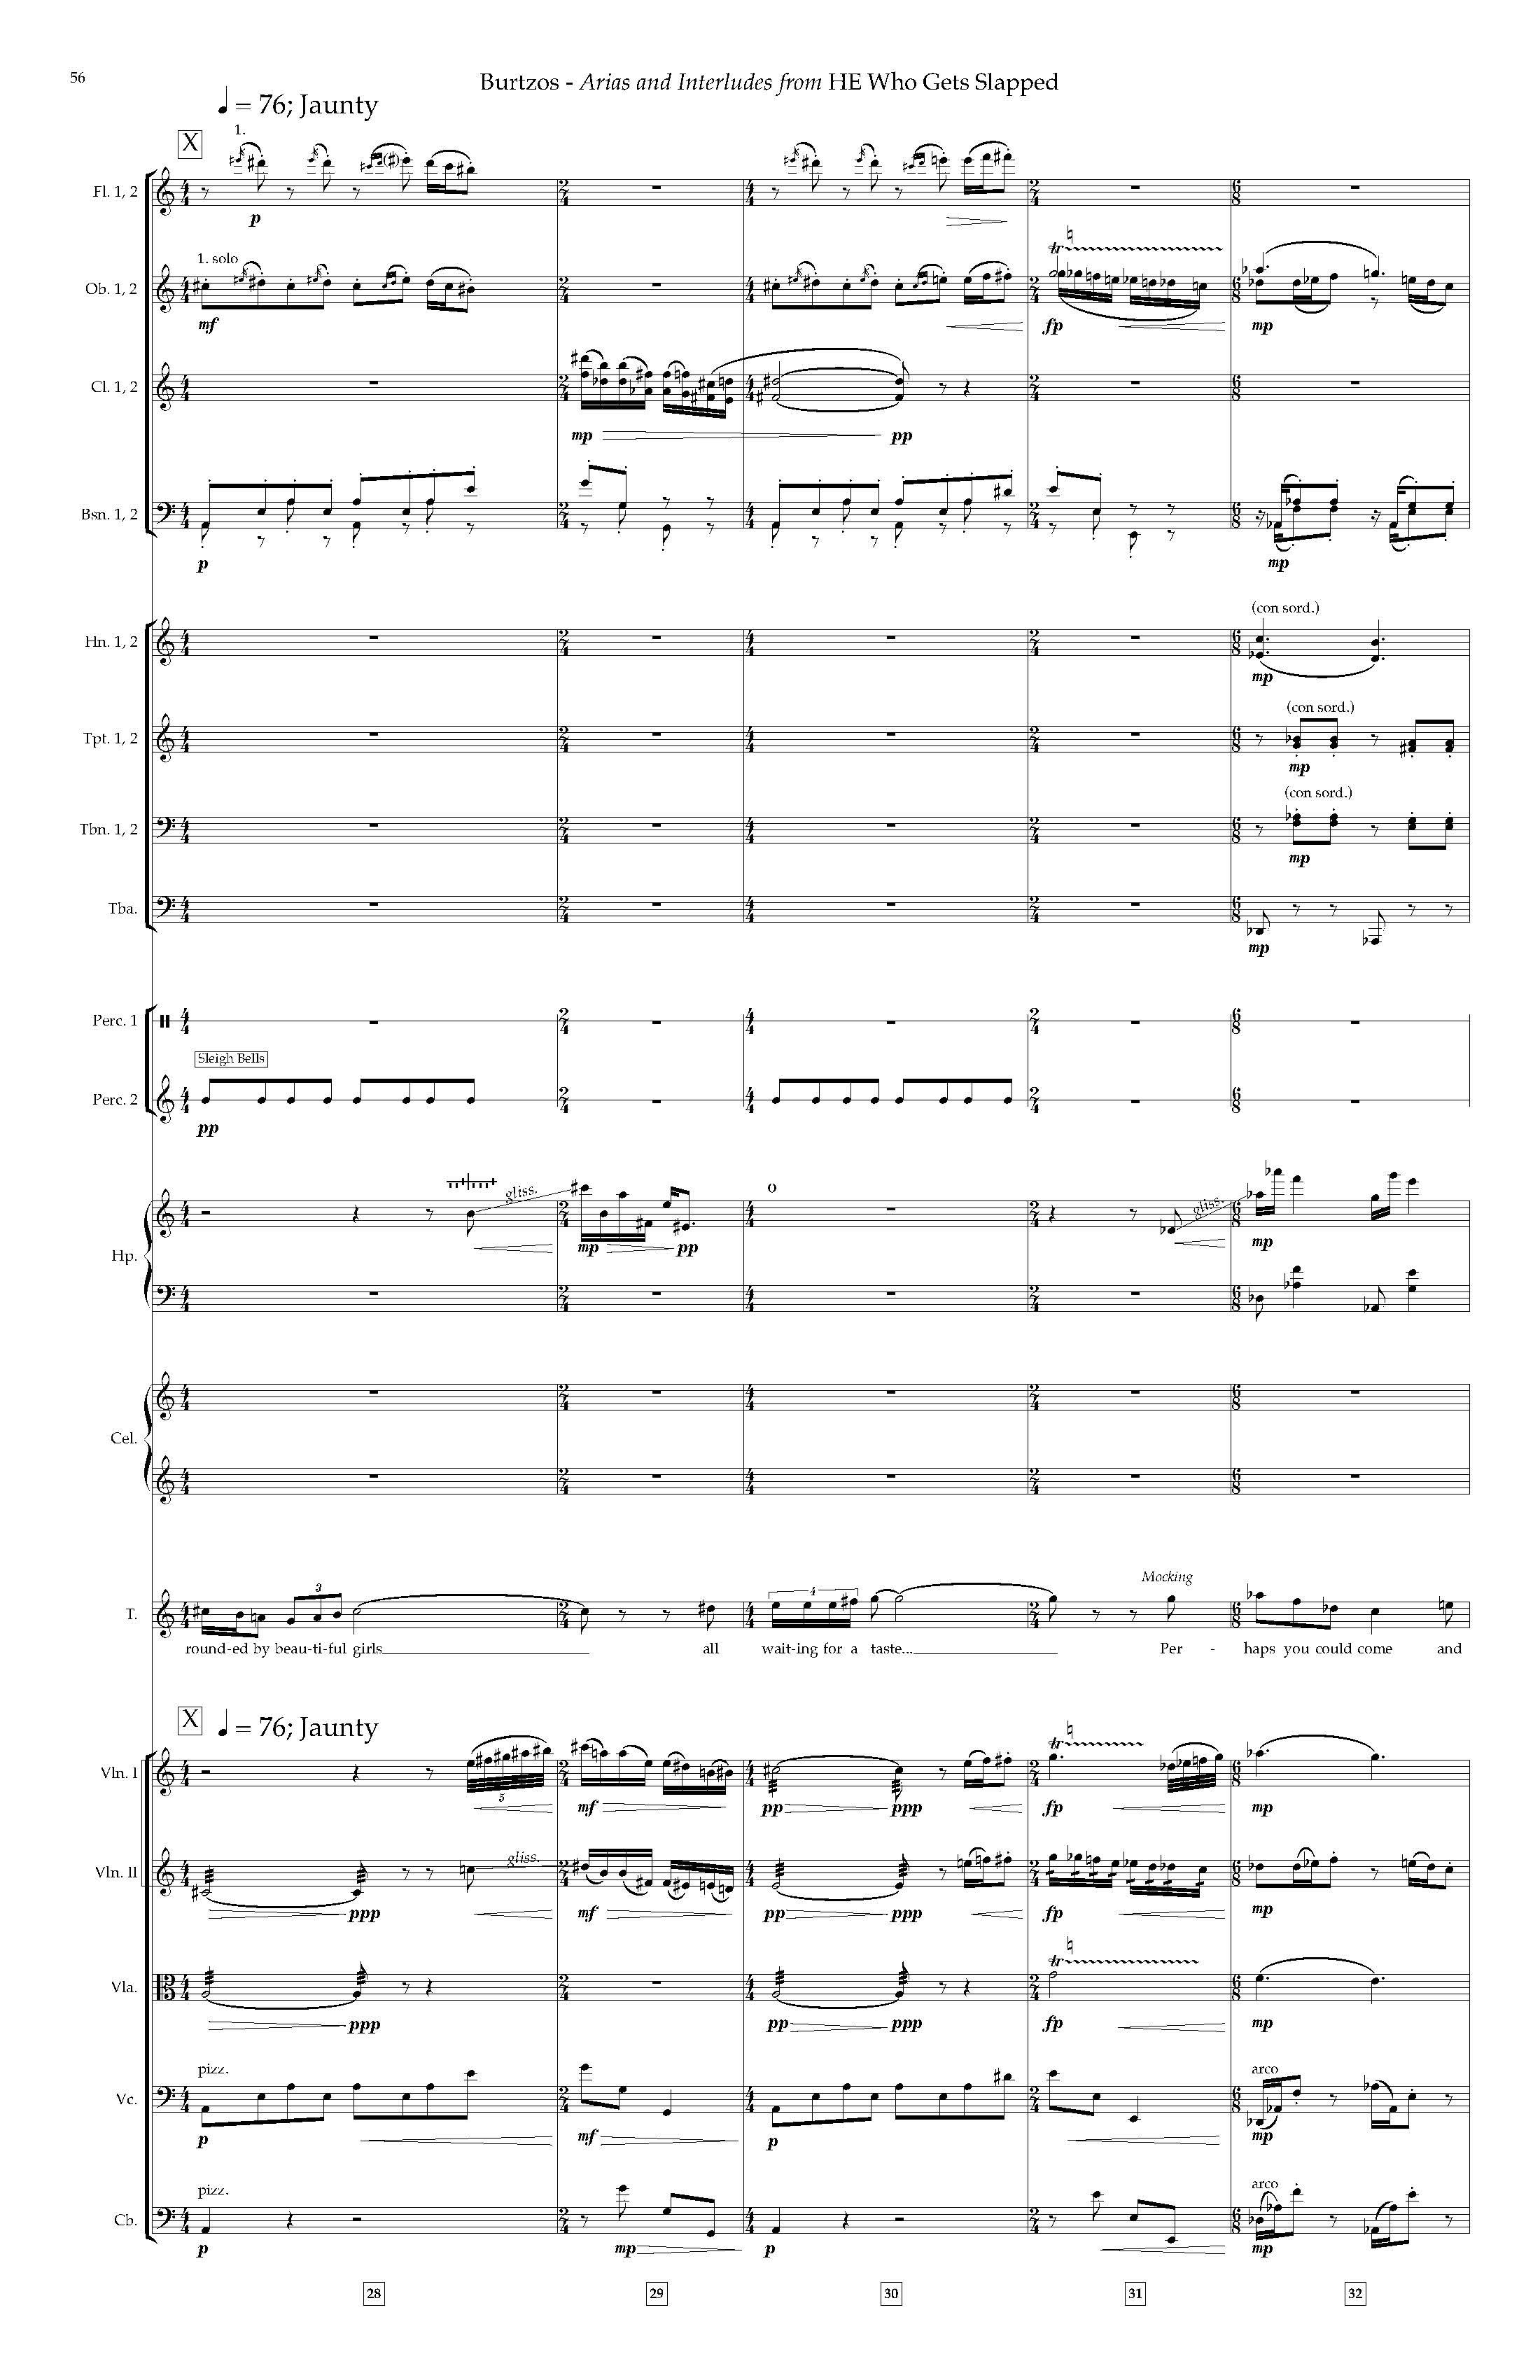 Arias and Interludes from HWGS - Complete Score_Page_62.jpg